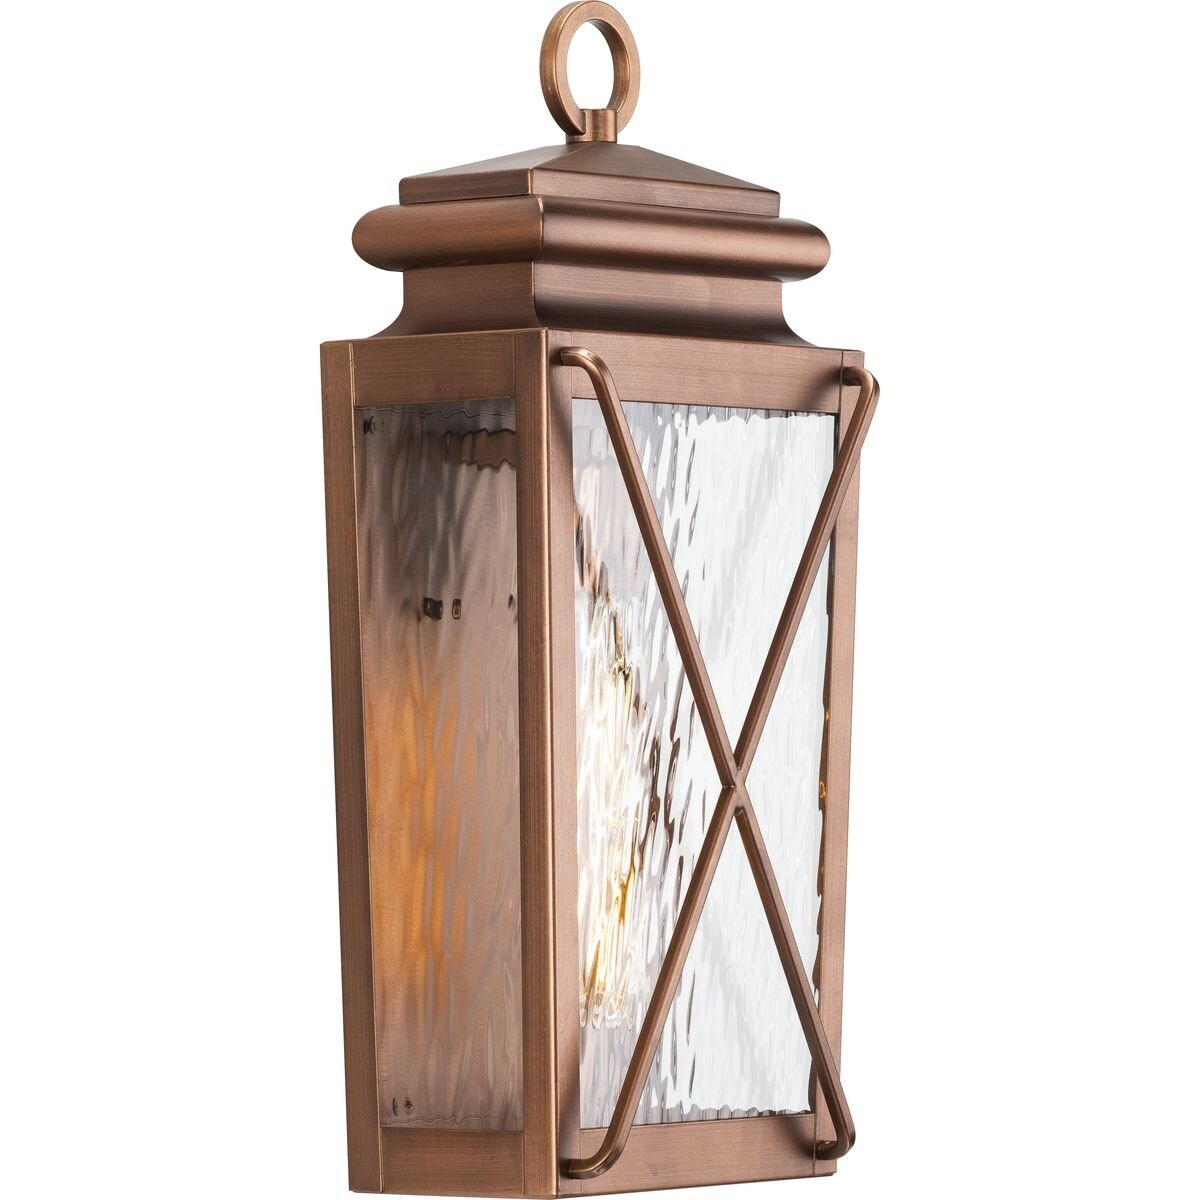 Wakeford Collection 1-Light Antique Copper Clear Water Transitional Outdoor  Small Wall Lantern Light in x 5.75 in x 17.88 in Bed Bath  Beyond  32821313